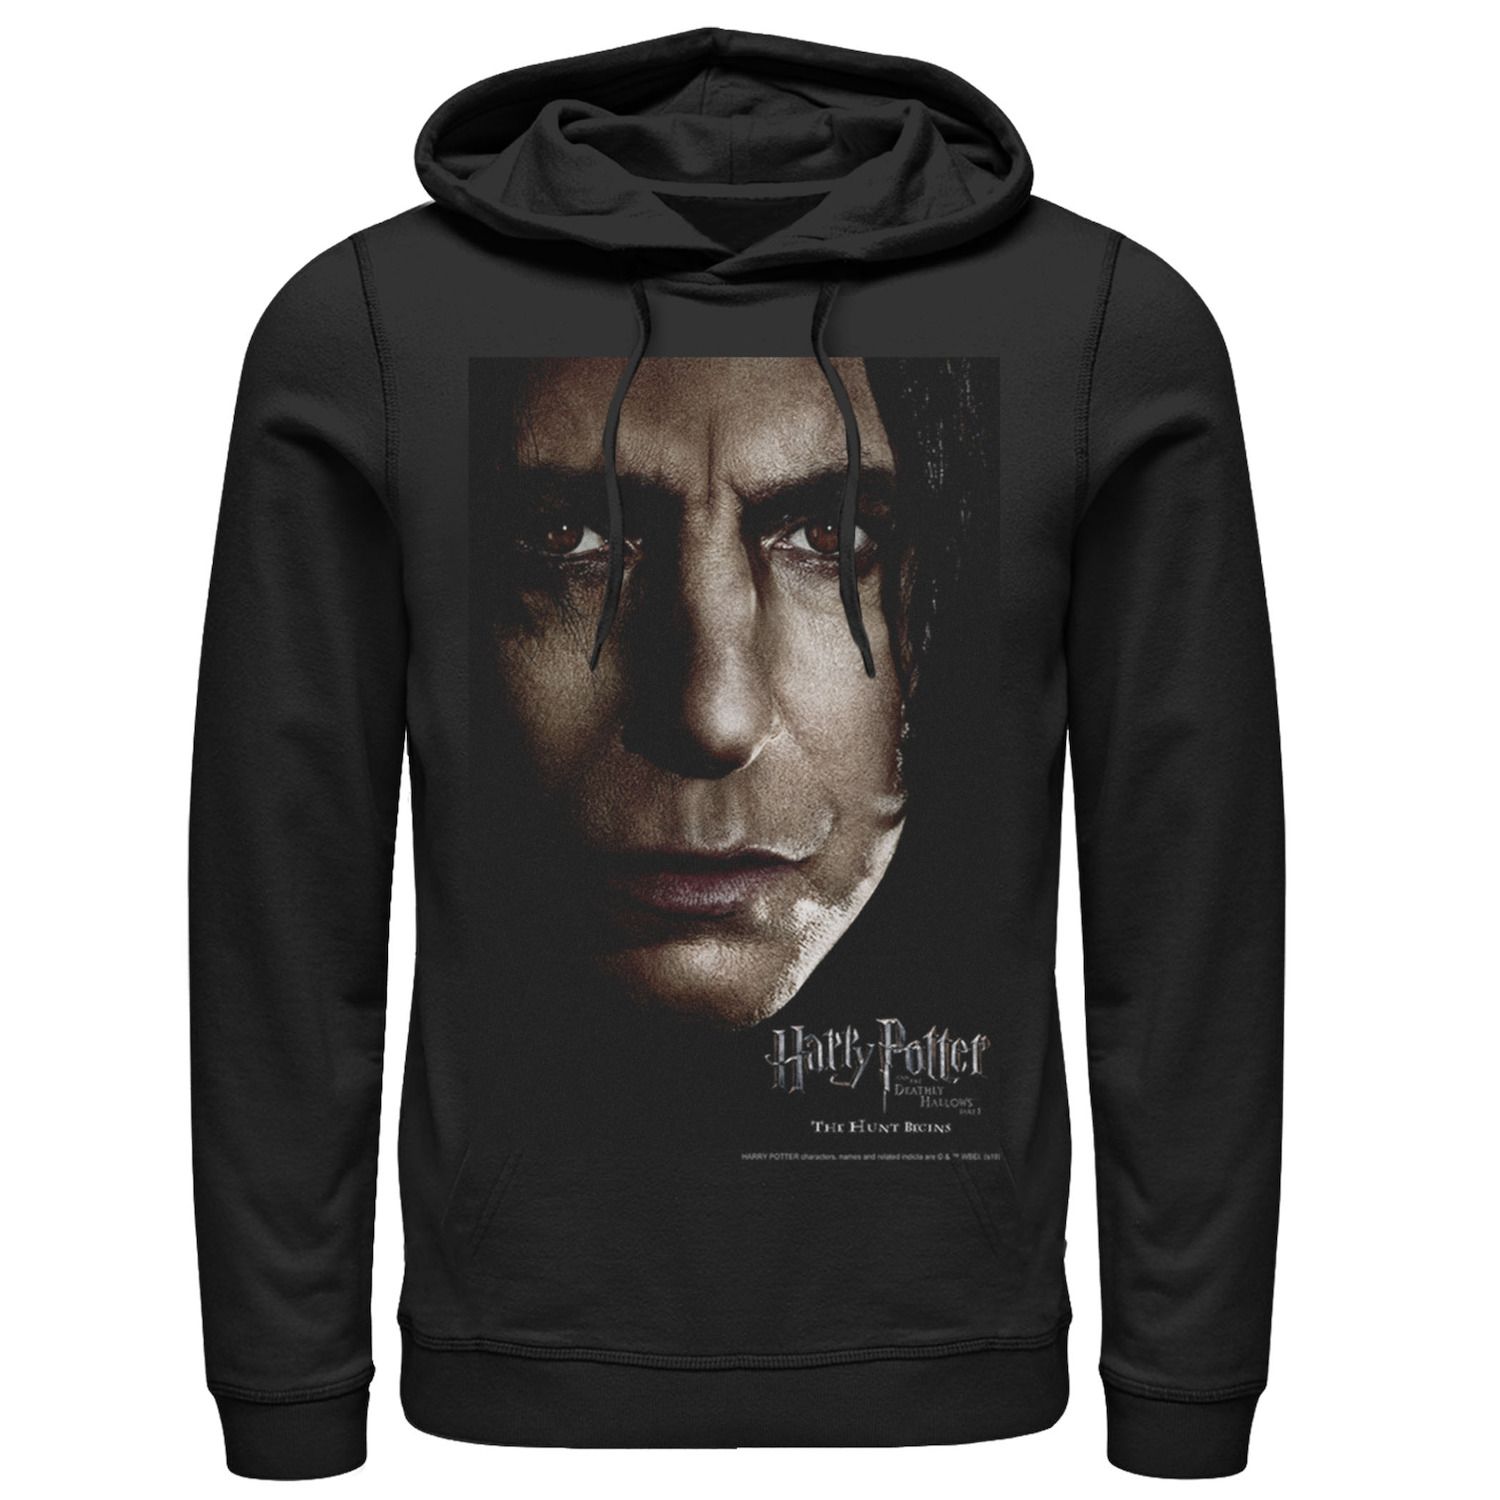 Image for Harry Potter Men's Deathly Hallows Snape Character Poster Graphic Pullover Hoodie at Kohl's.